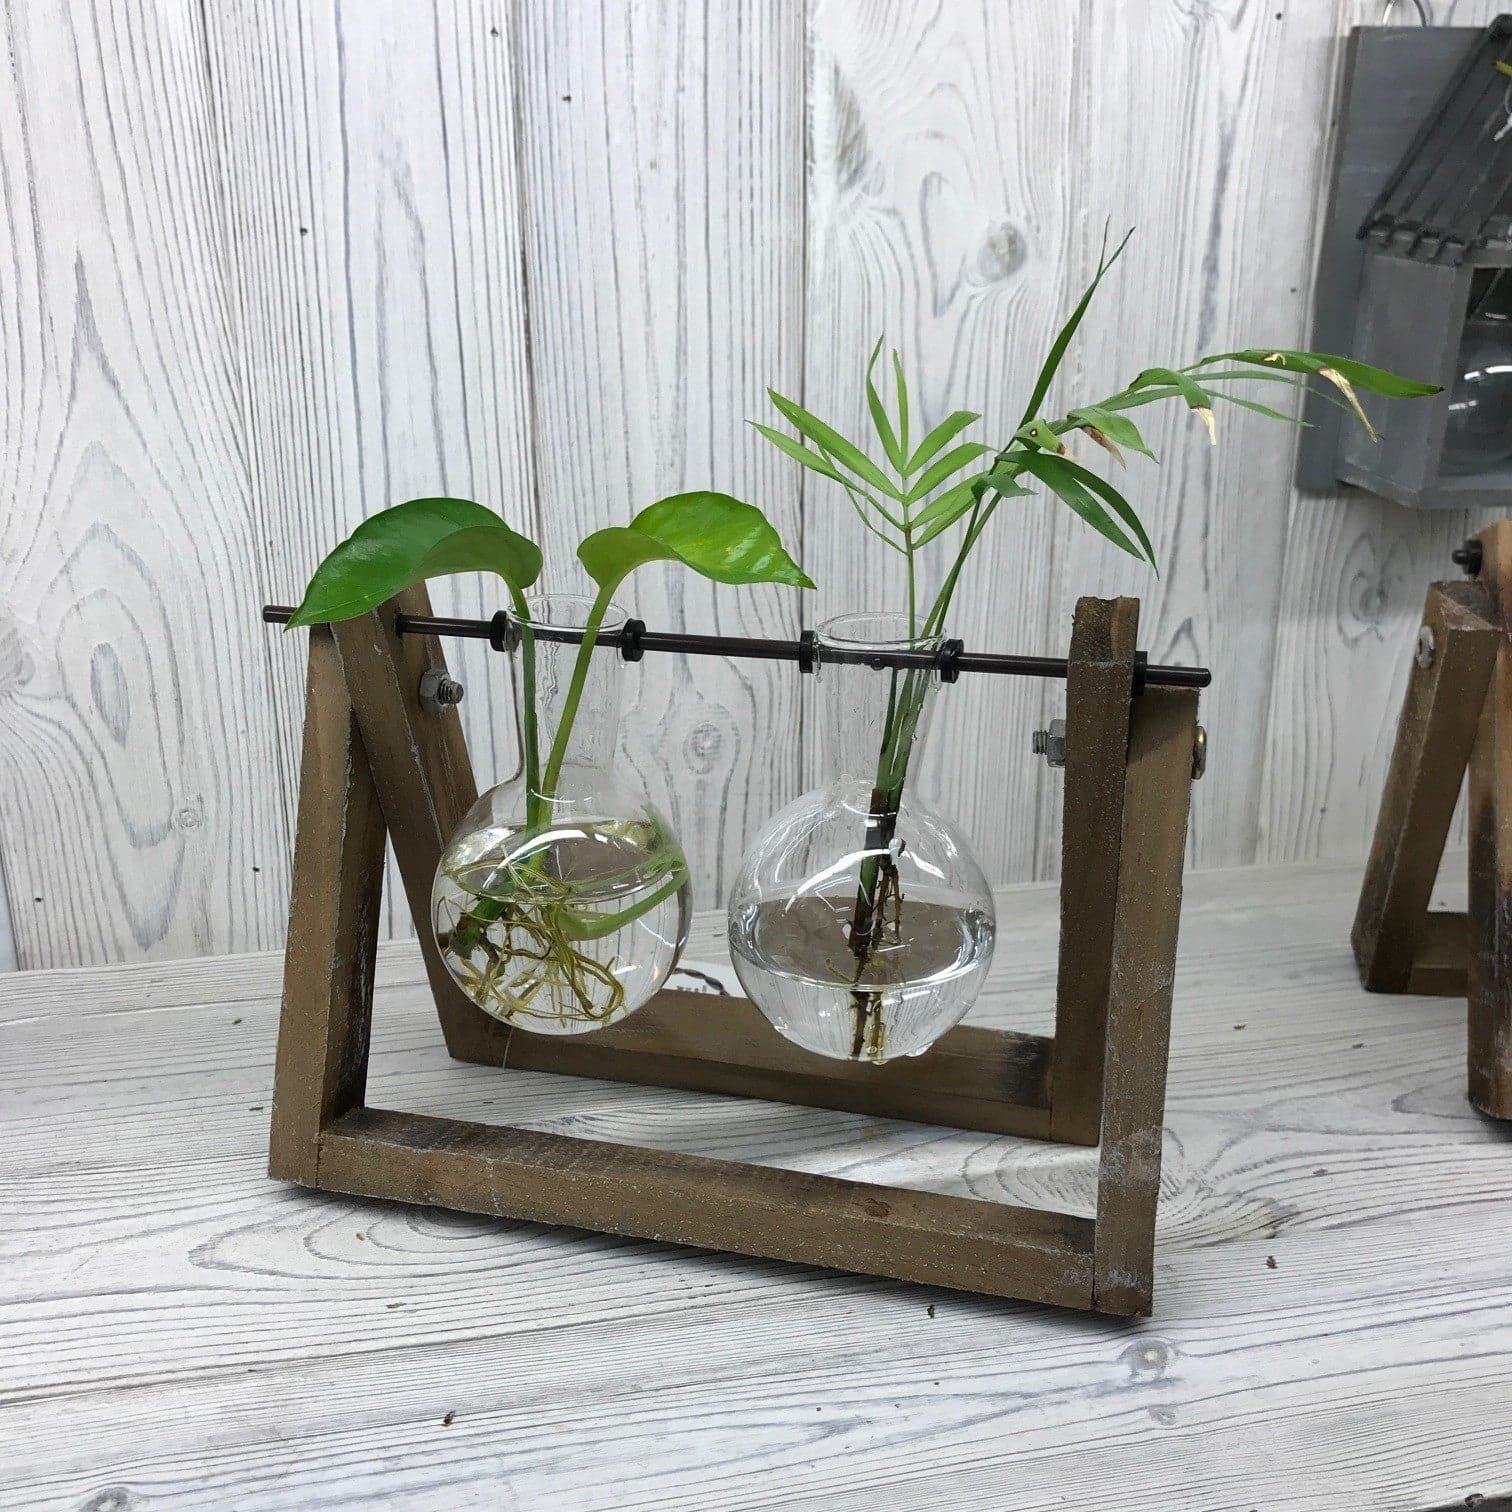 Hydroponic Home Décor - Two Pot Wooden Stand - best price from Maltashopper.com HHD-02